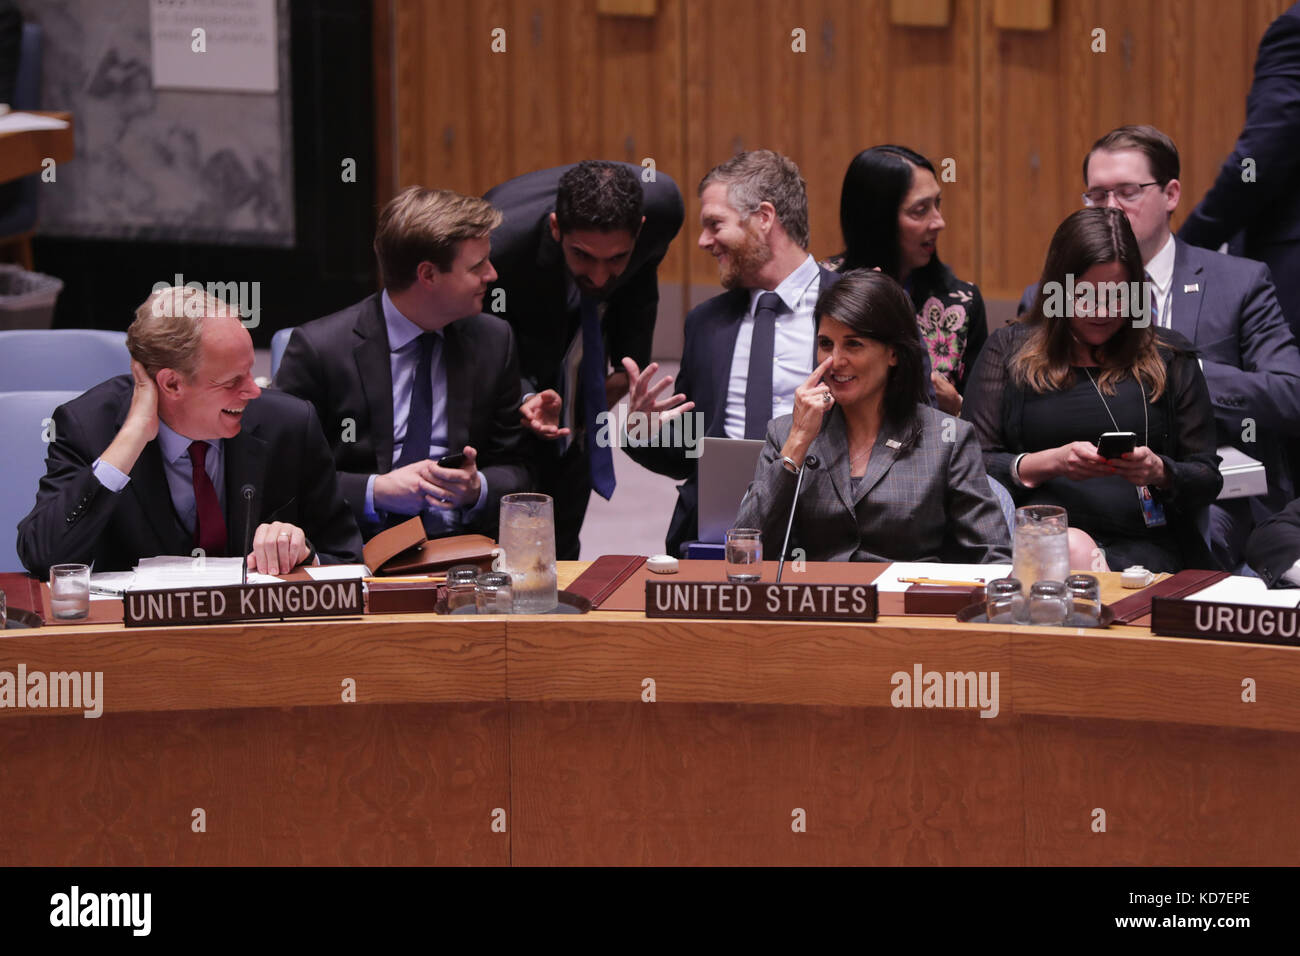 New York, NY, USA. 10th October,  2017. United Nations, New York, USA British UN Ambassador Matthew Rycroft and Nikki R. Haley, United States Permanent Representative to the UN During a Security Council meeting on Yemen today at the UN Headquarters in New York.Photo: Luiz Rampelotto/EuropaNewswire Credit: Luiz Rampelotto/ZUMA Wire/Alamy Live News Stock Photo